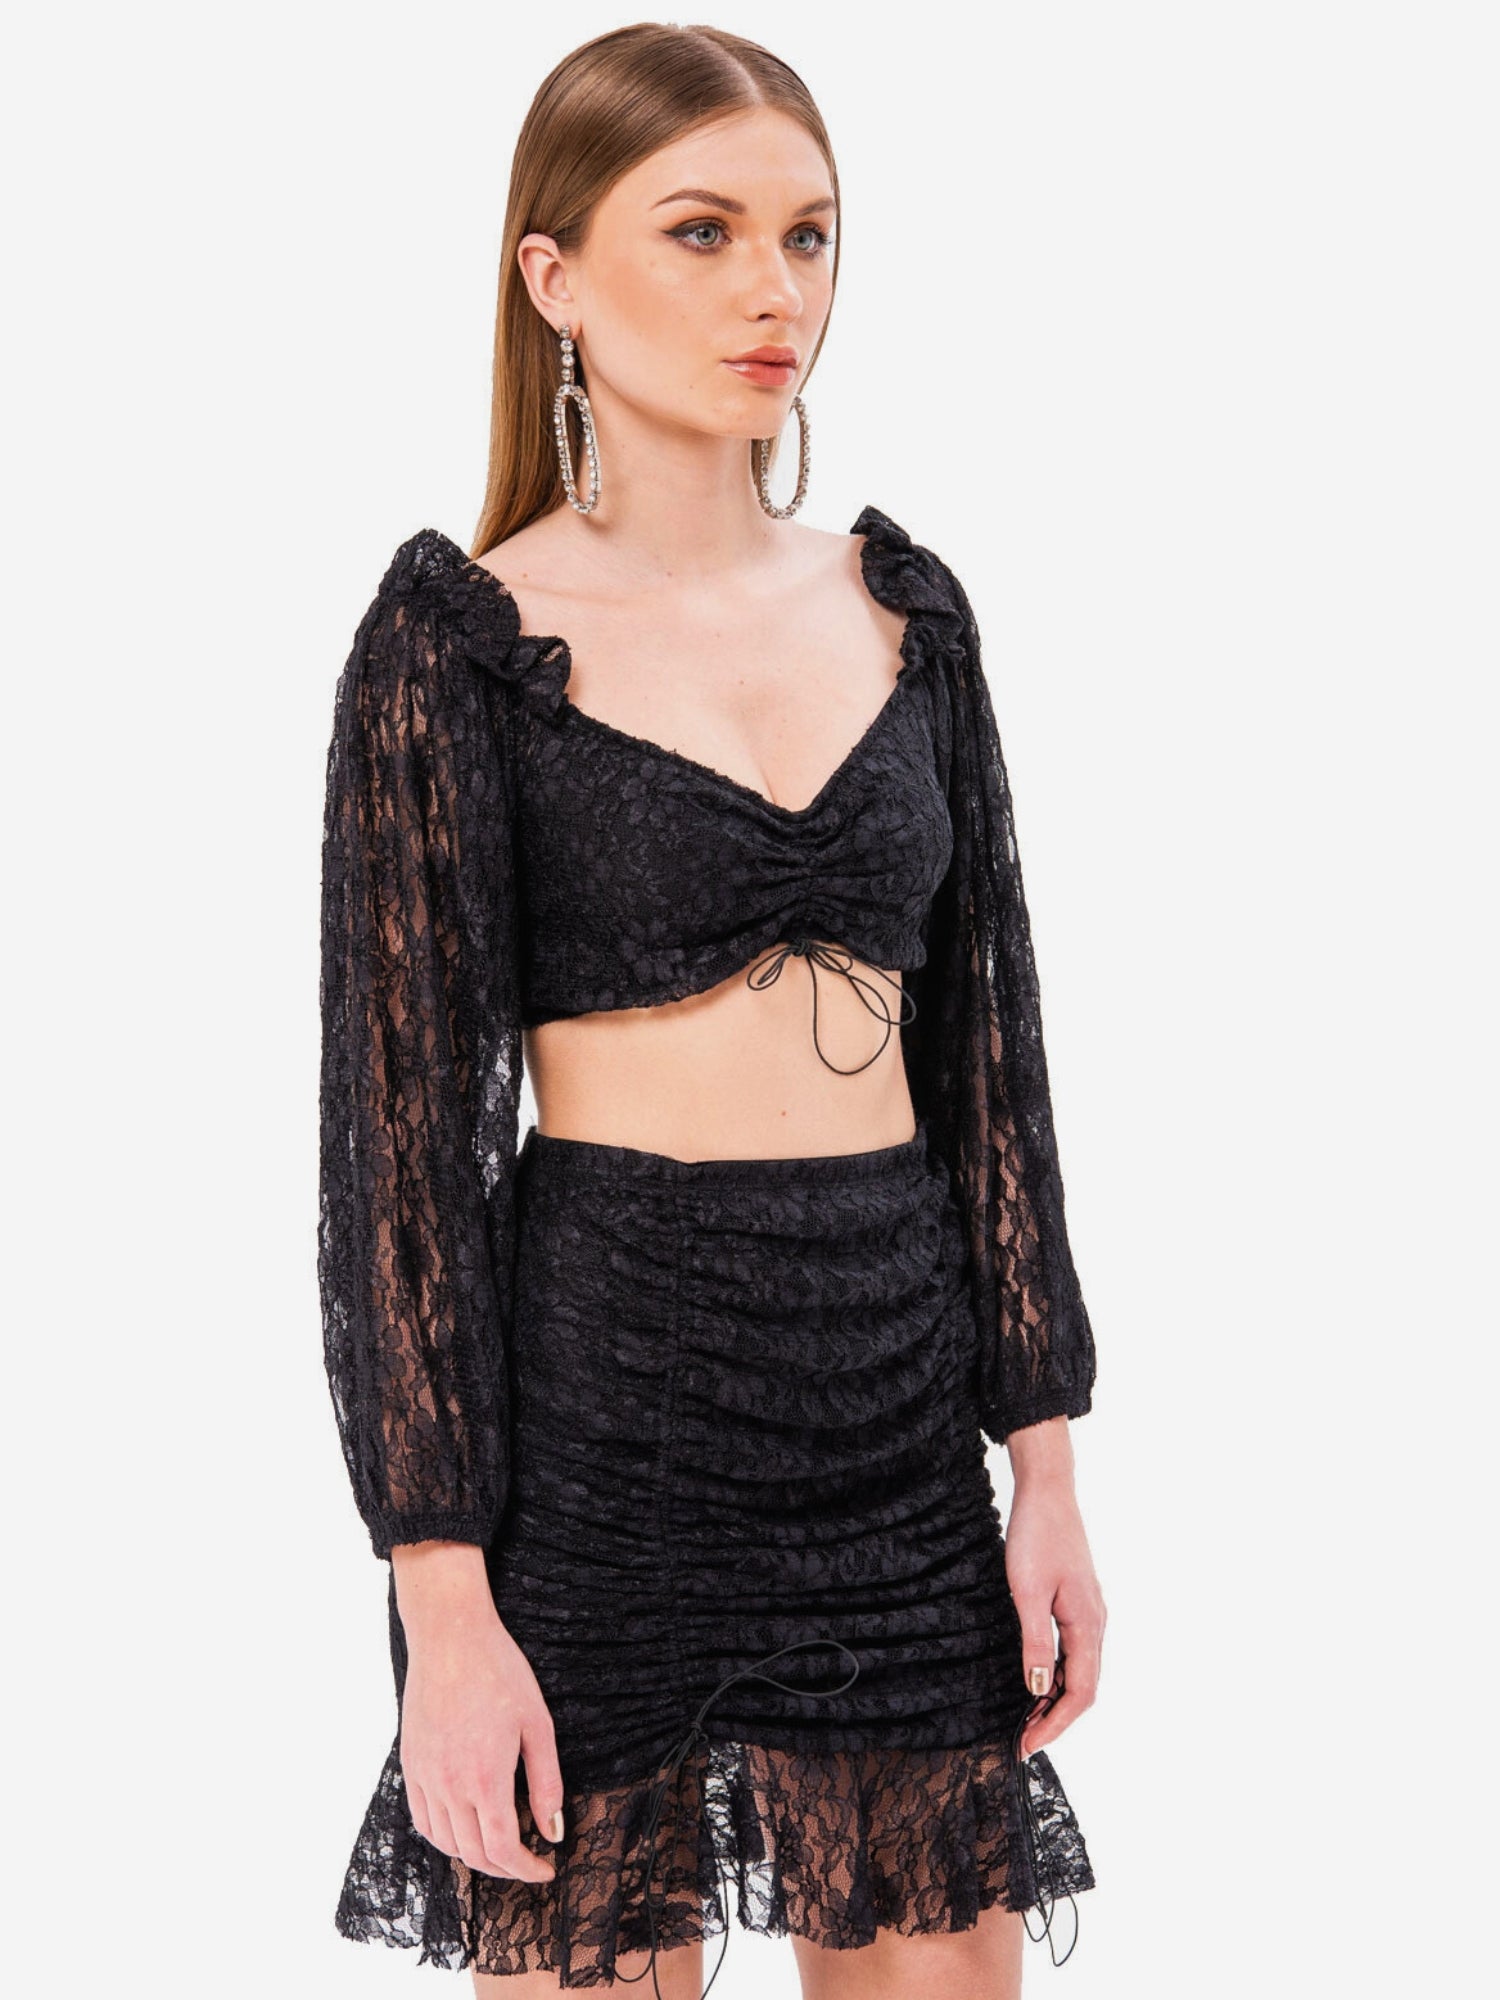 The Black Magic Lace Crop Top - The Black Magic Lace Crop Top will make a perfect addition to your wardrobe! This gorgeous top features a black lace design that will flatter any figure. The top features sheer lace long sleeves. - Ivory Sheep Collection Li